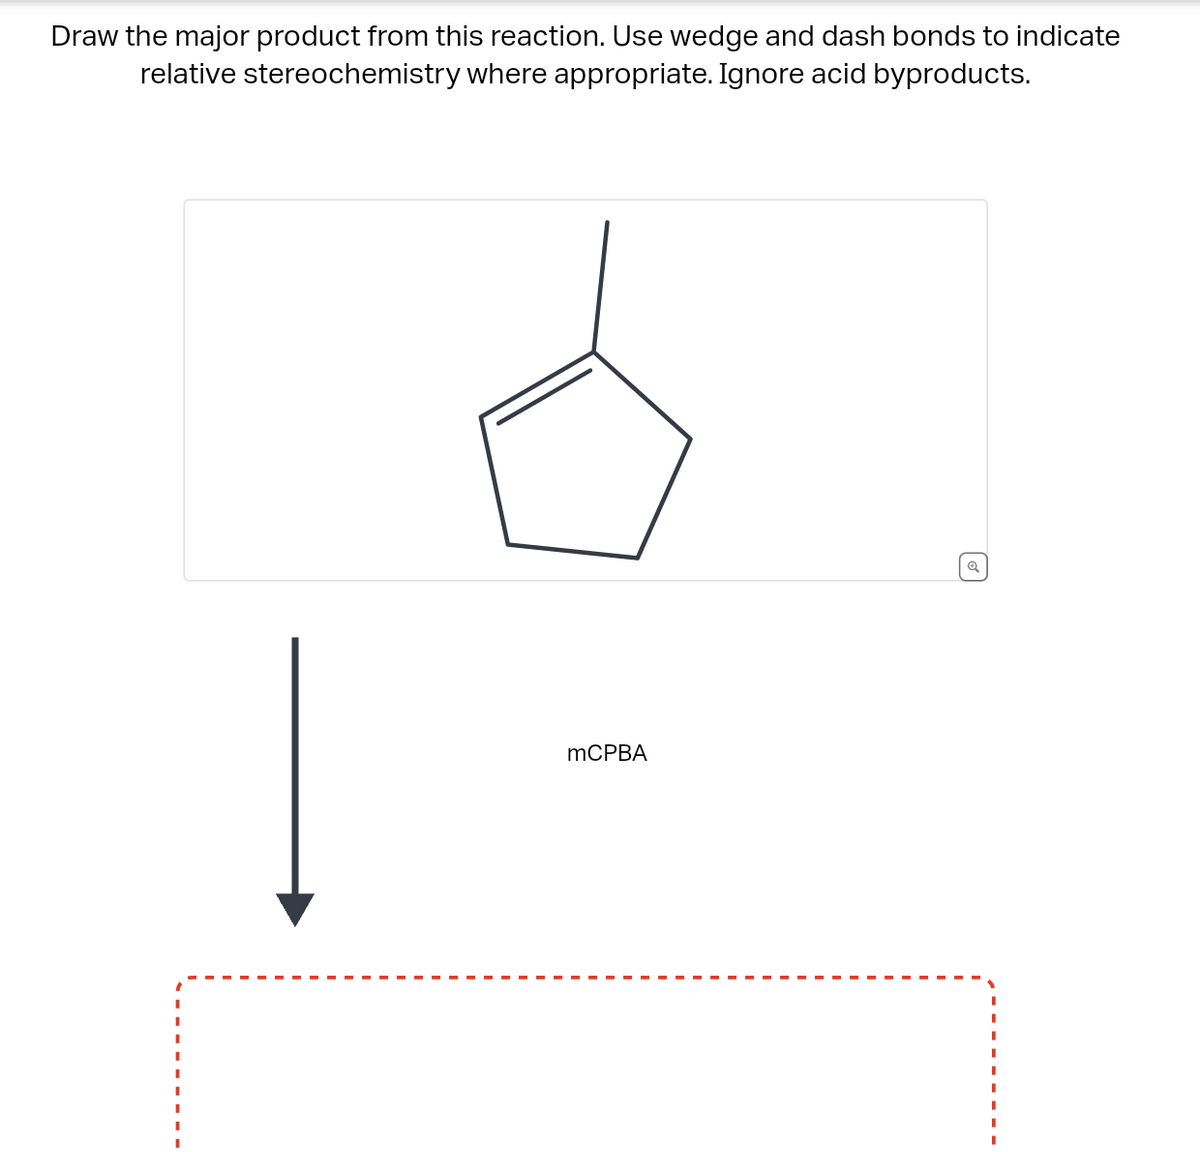 Draw the major product from this reaction. Use wedge and dash bonds to indicate
relative stereochemistry where appropriate. Ignore acid byproducts.
mCPBA
[o]
Q